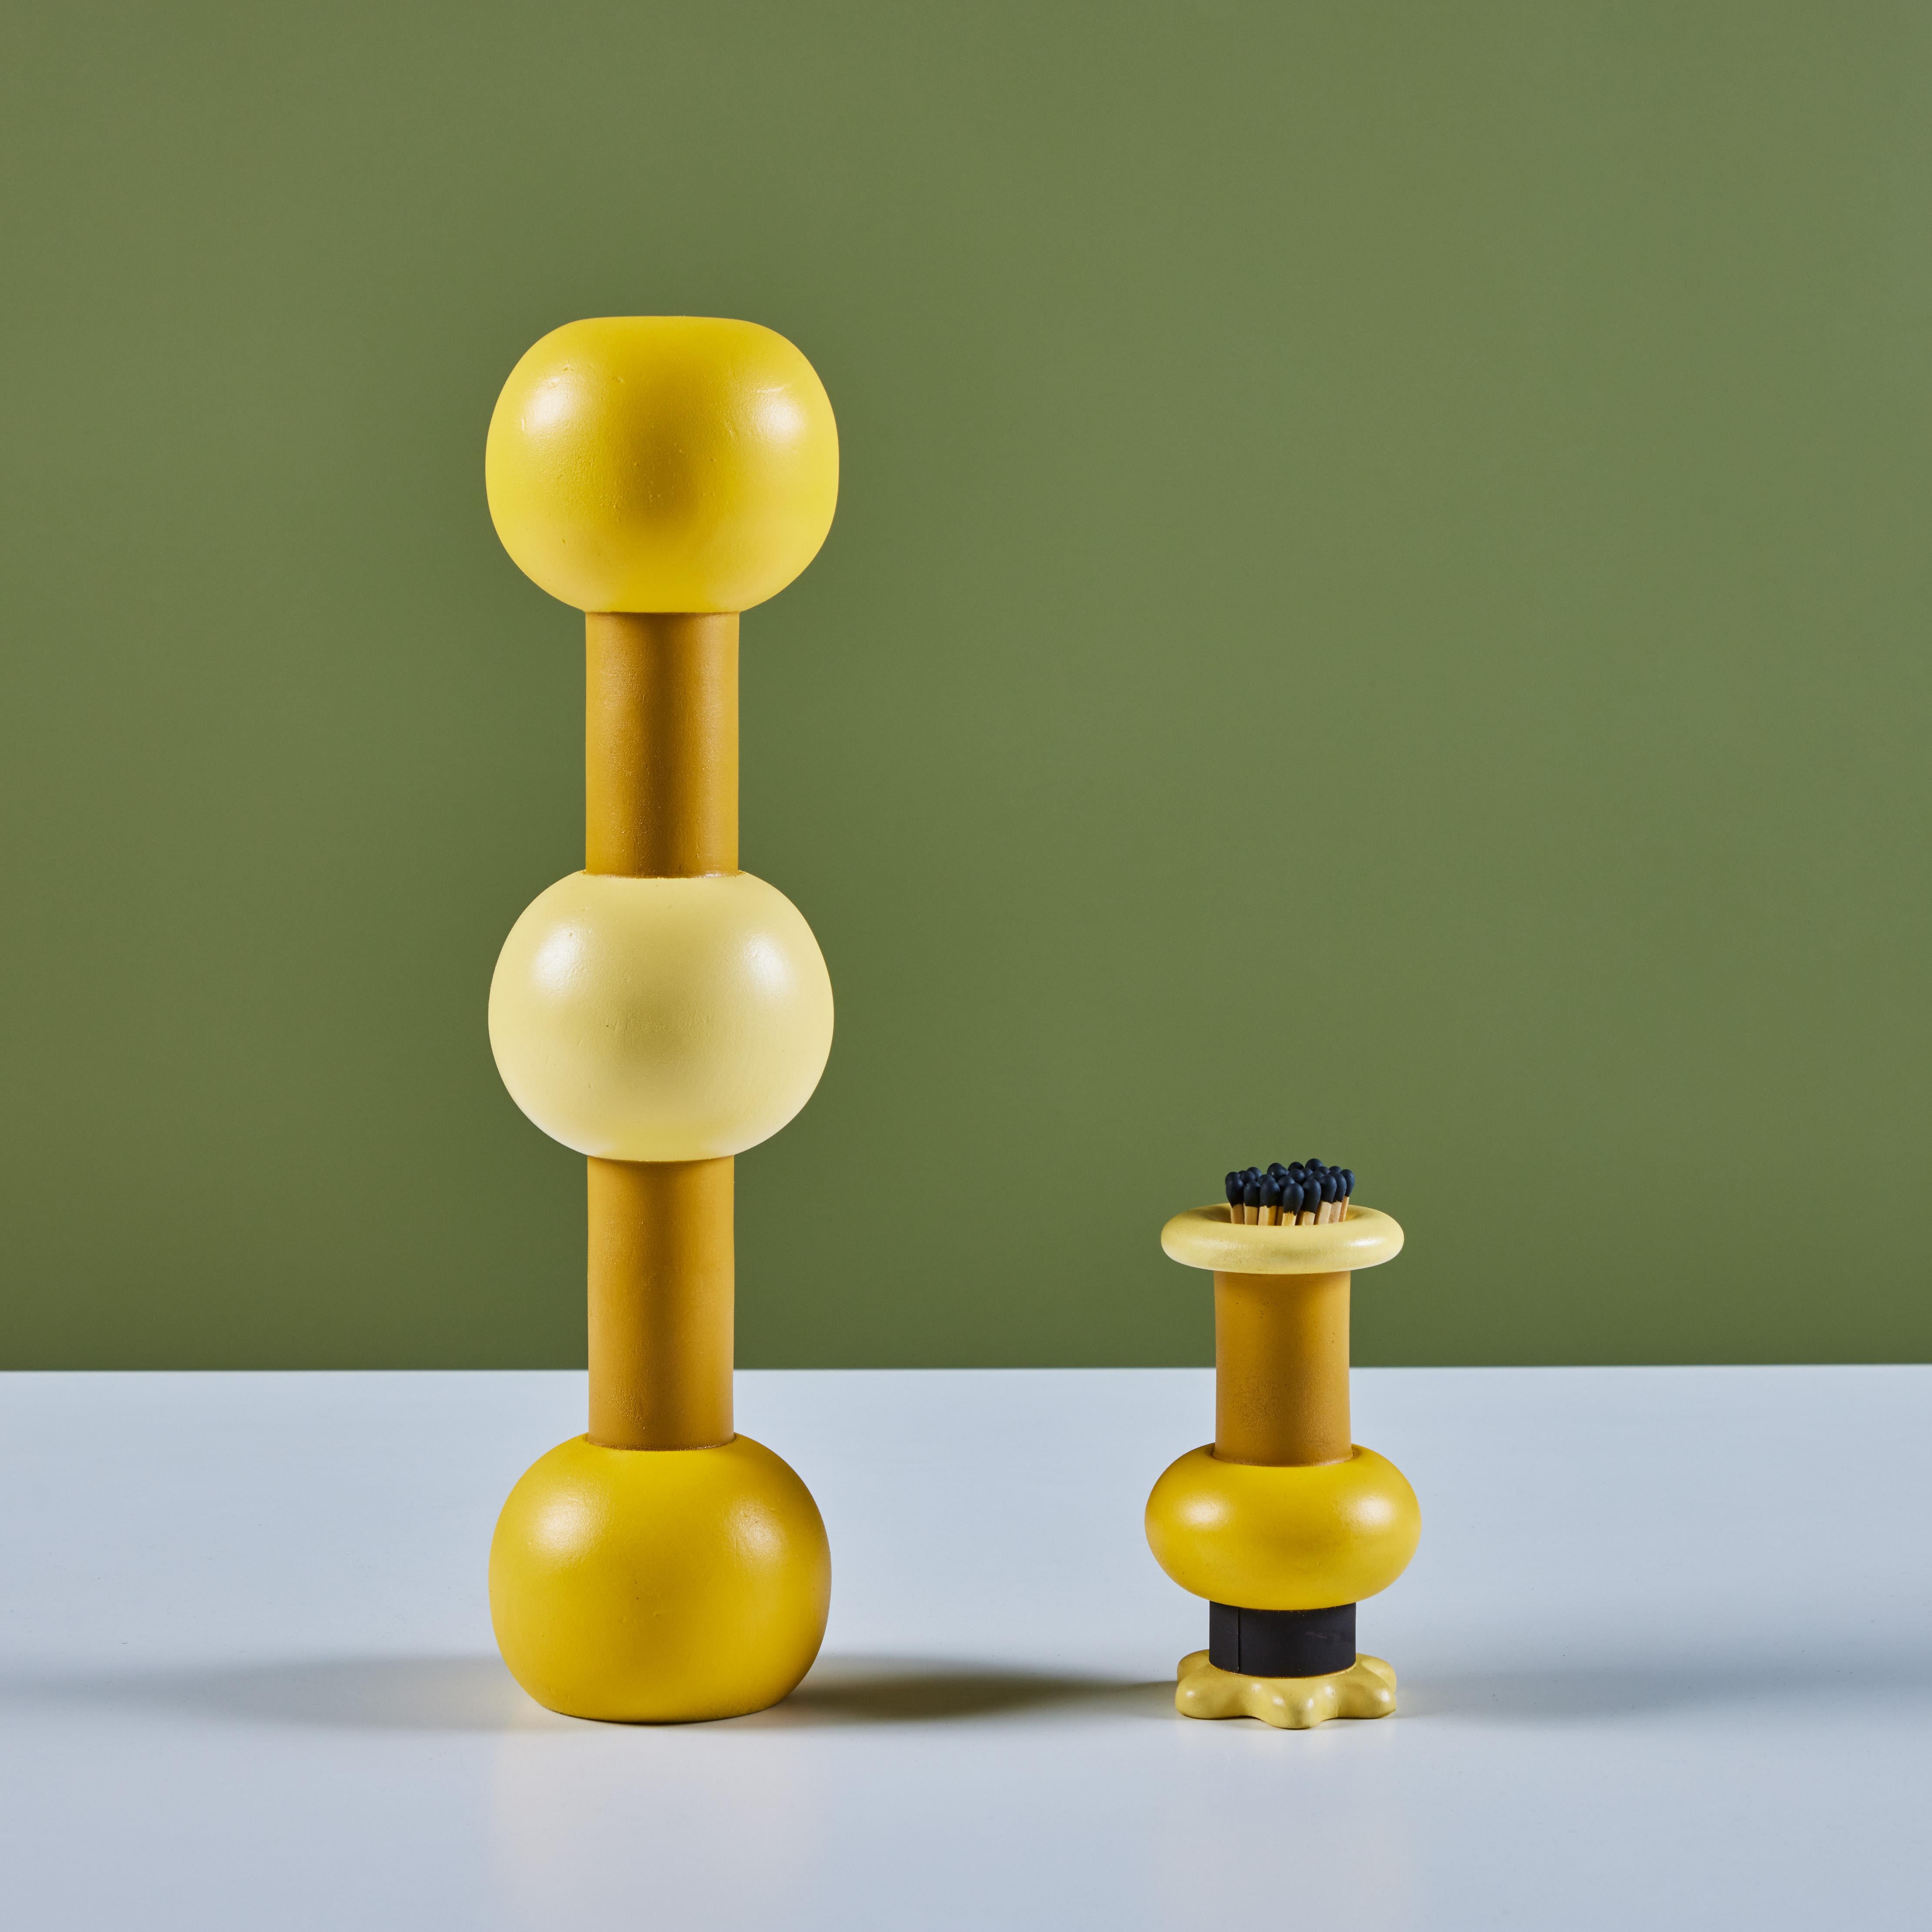 Hand crafted candlestick and match holder set in spalted birch and then painted by local Los Angeles artist Evan Segota. The candle holder features three spheres and an inset brass cup while the match holder offers a match strike near the